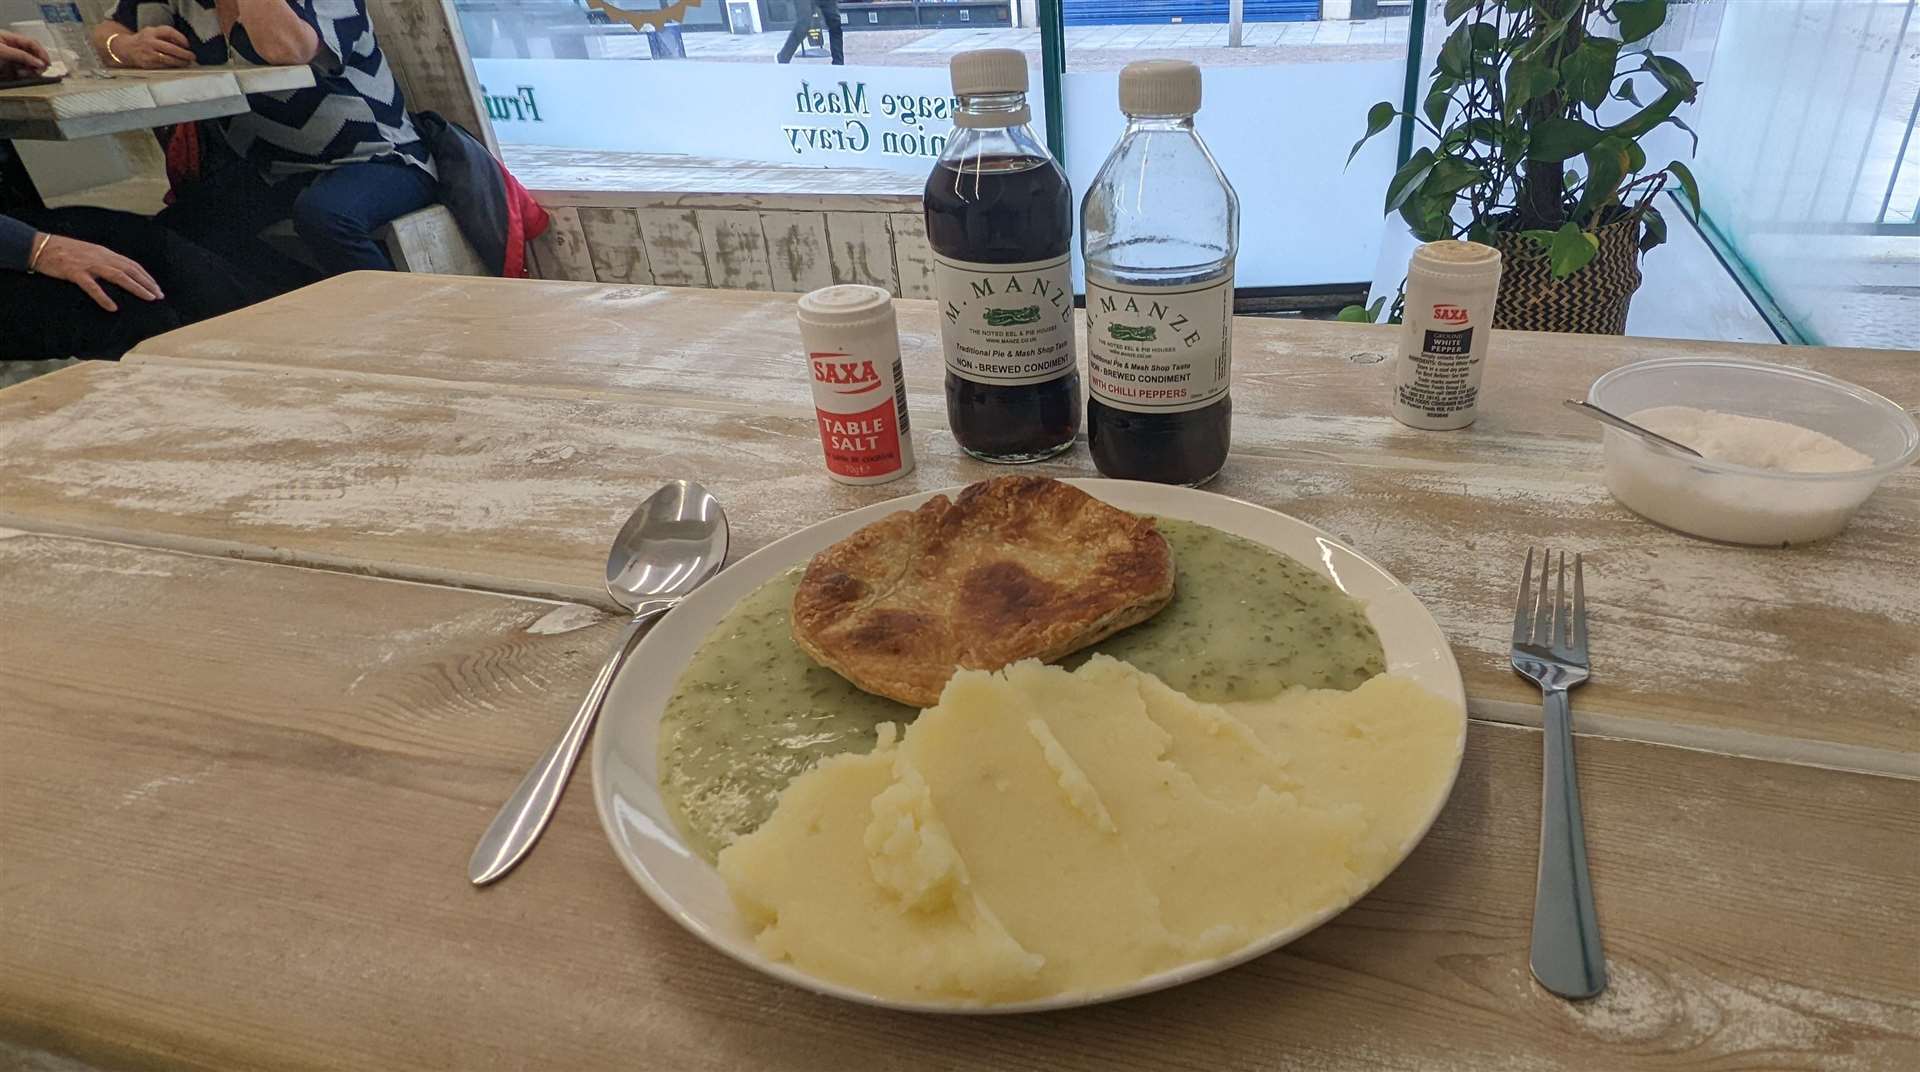 Sitting down to pie and mash at Betty's